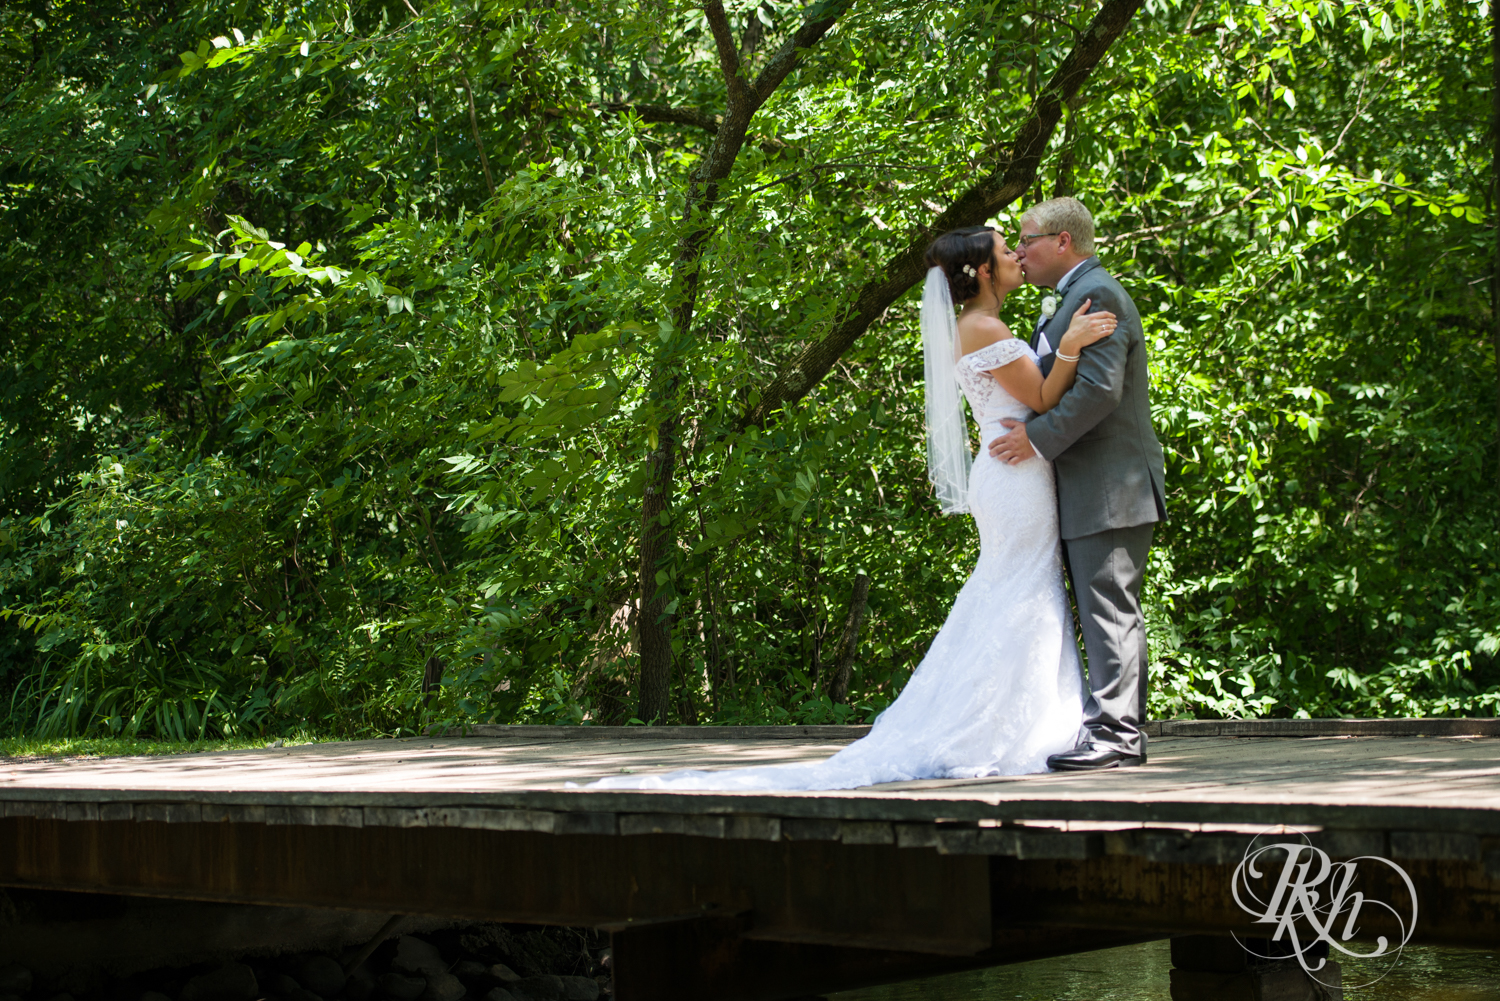 Bride and groom kiss on bridge at Creekside Farm Weddings and Events in Rush City, Minnesota.